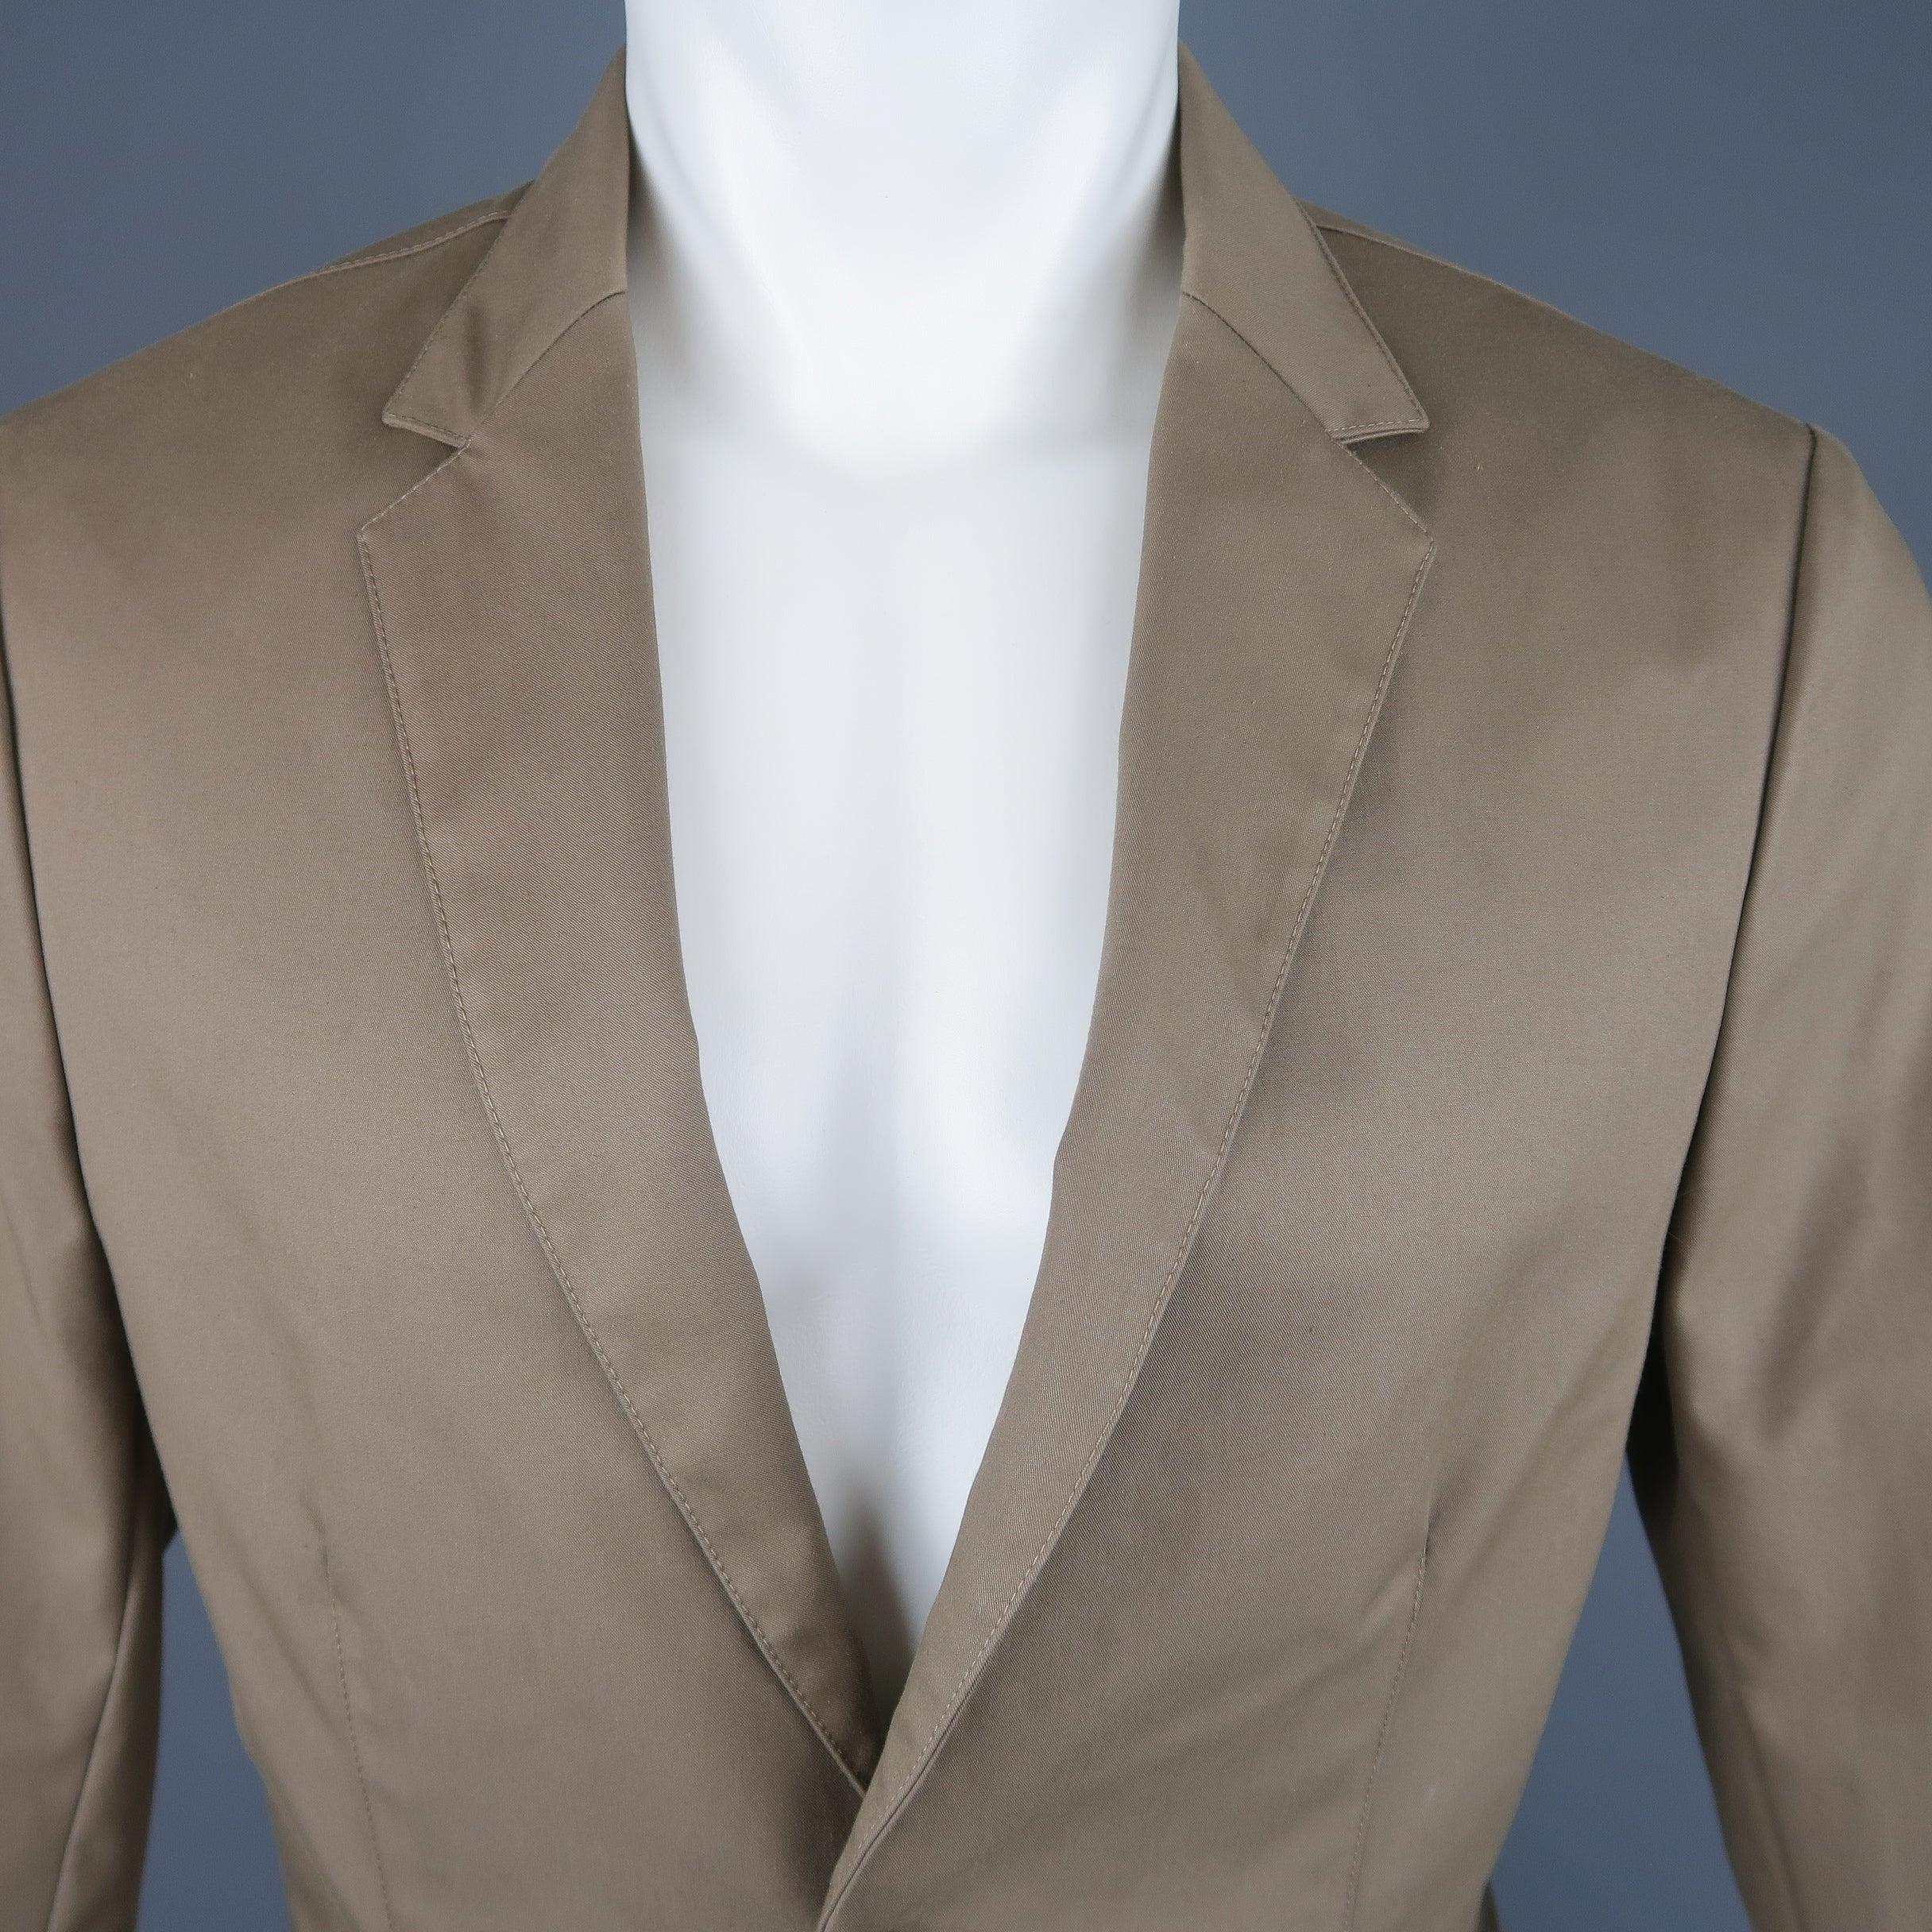 Single breasted CALVIN KLEIN COLLECTION monochromatic sport coat jacket comes in taupe cotton blend structured fabric with a notch lapel, two button front, and ventless back. Made in Italy.New with tags
 

Marked:   IT 48
 

Measurements: 
